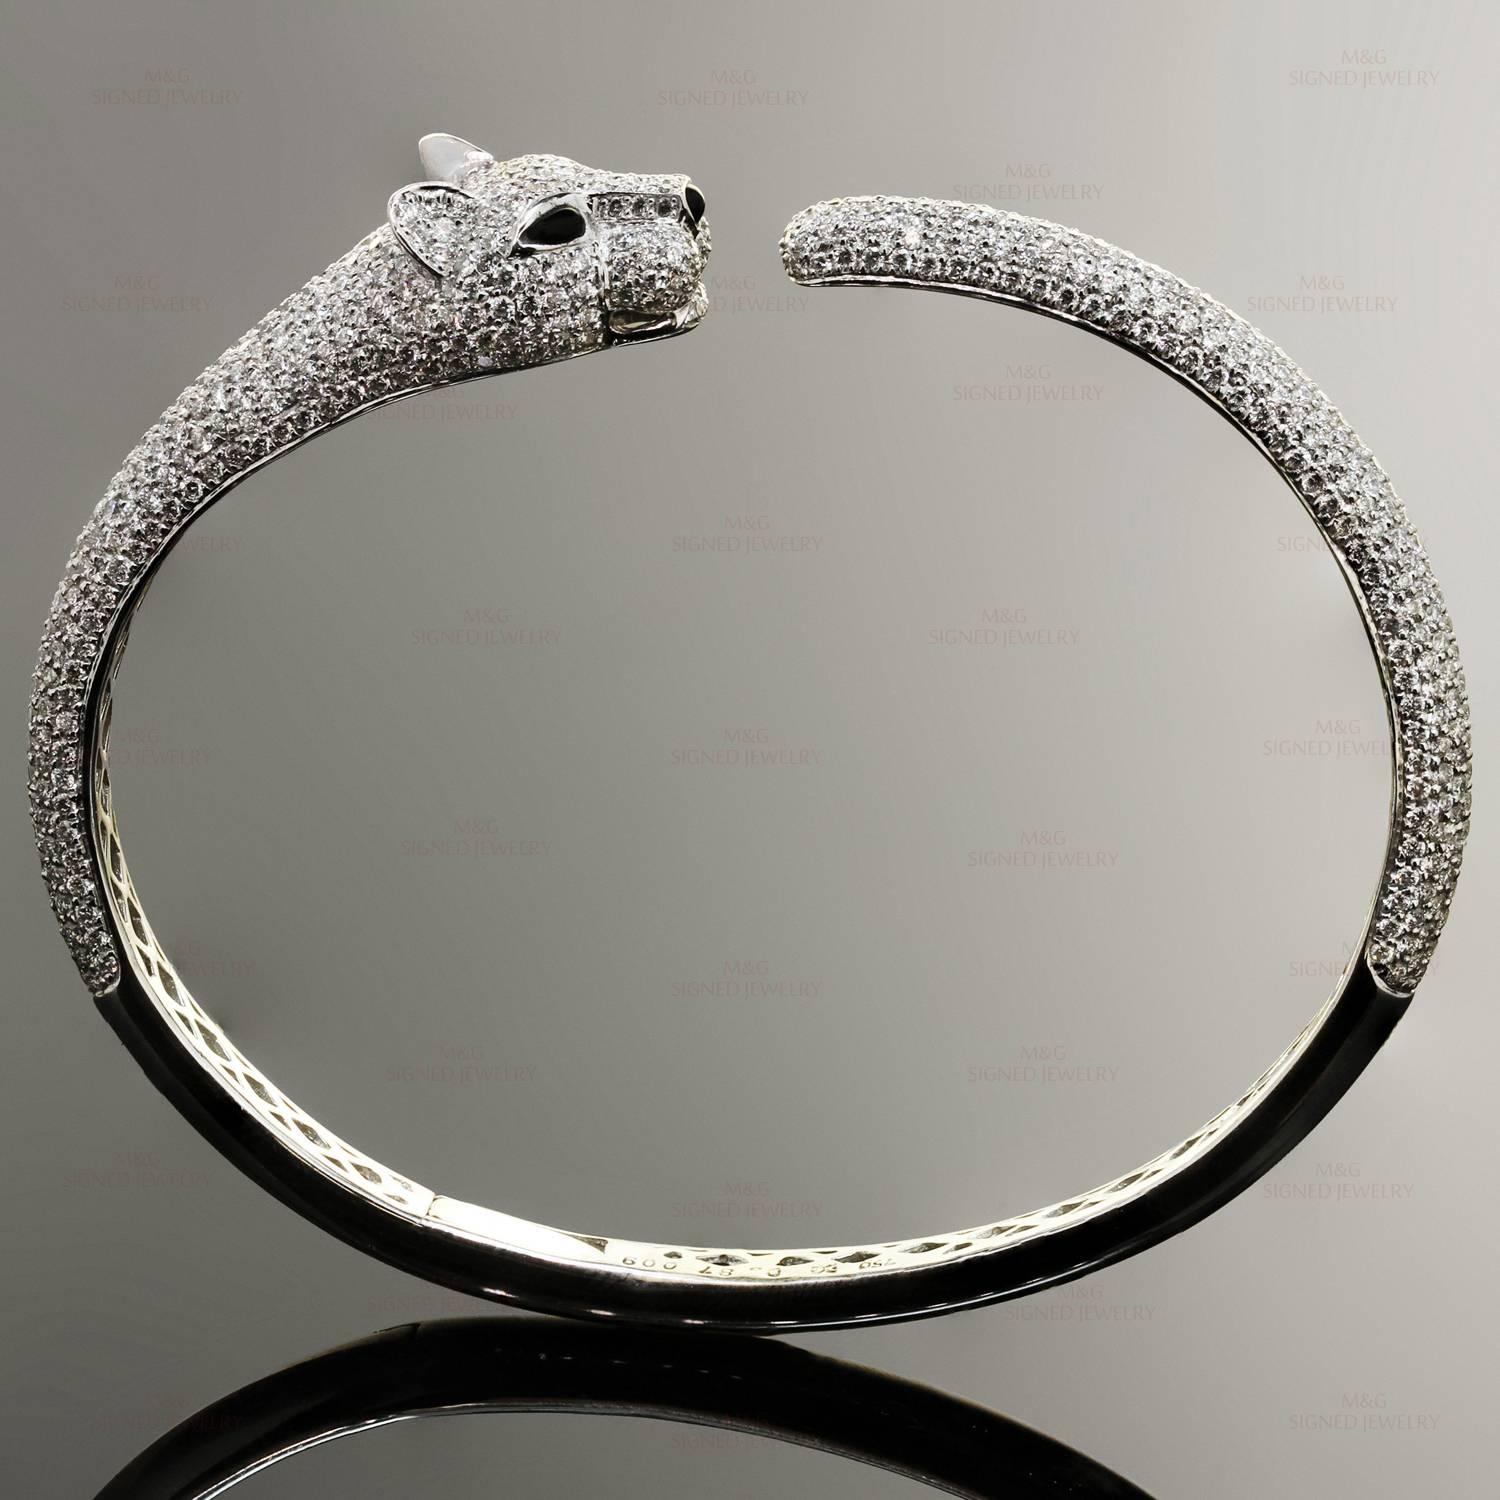 This gorgeous hinged bangle bracelet features a panther design crafted in 18k white gold and  black onyx eyes and approximately 600 round brilliant-cut diamonds of an estimated 4.90 carats. The inner length is 6 inches. Made in United States circa